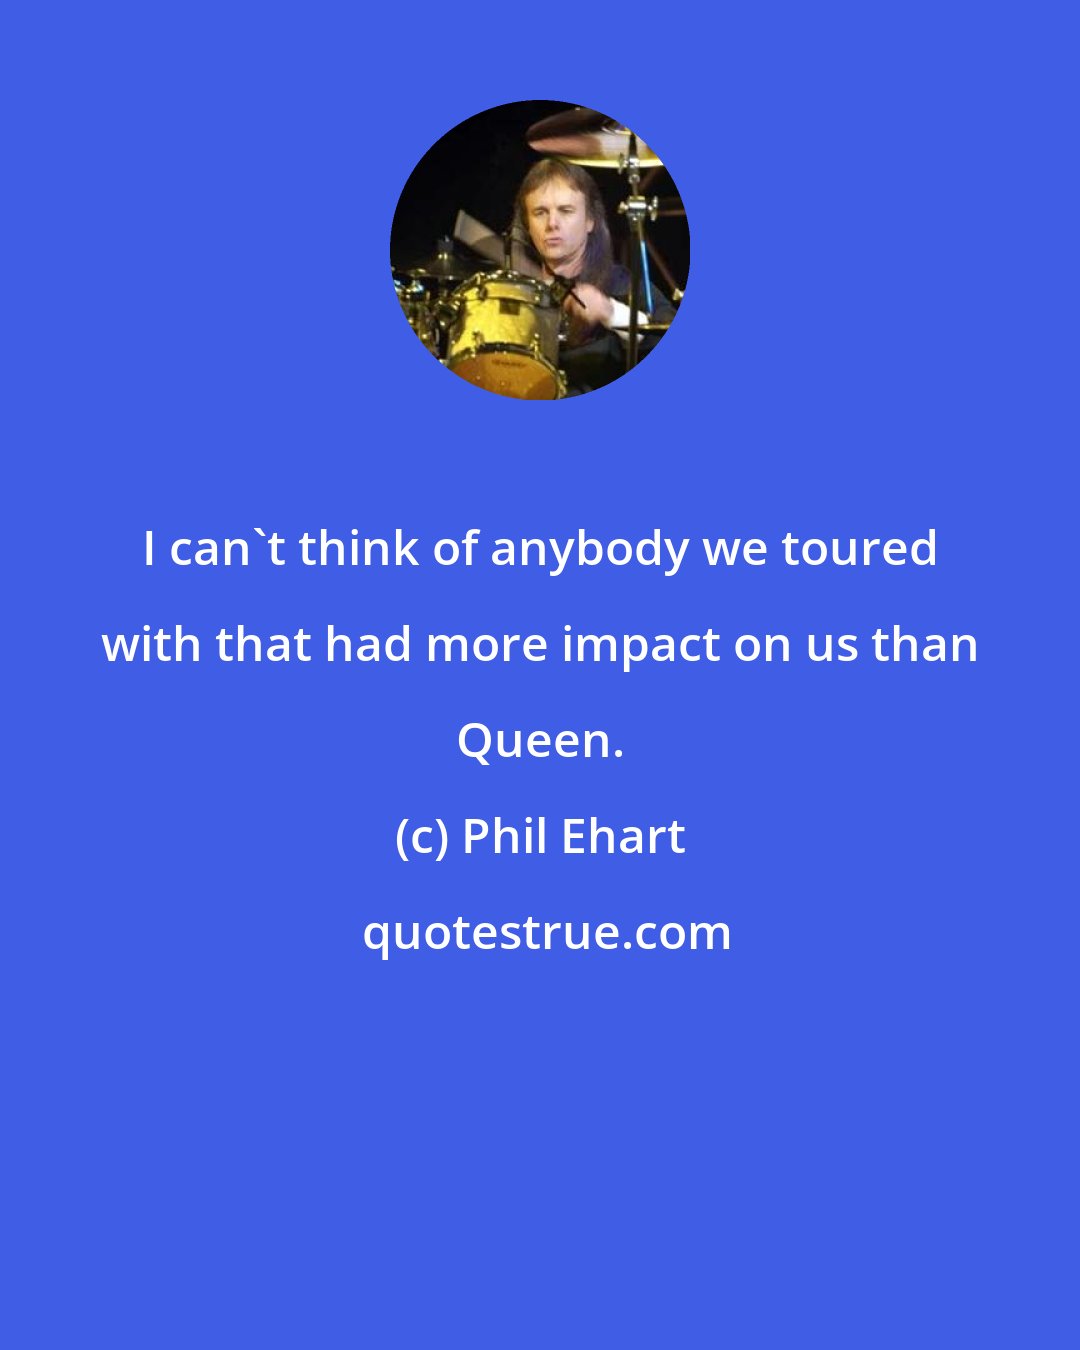 Phil Ehart: I can't think of anybody we toured with that had more impact on us than Queen.